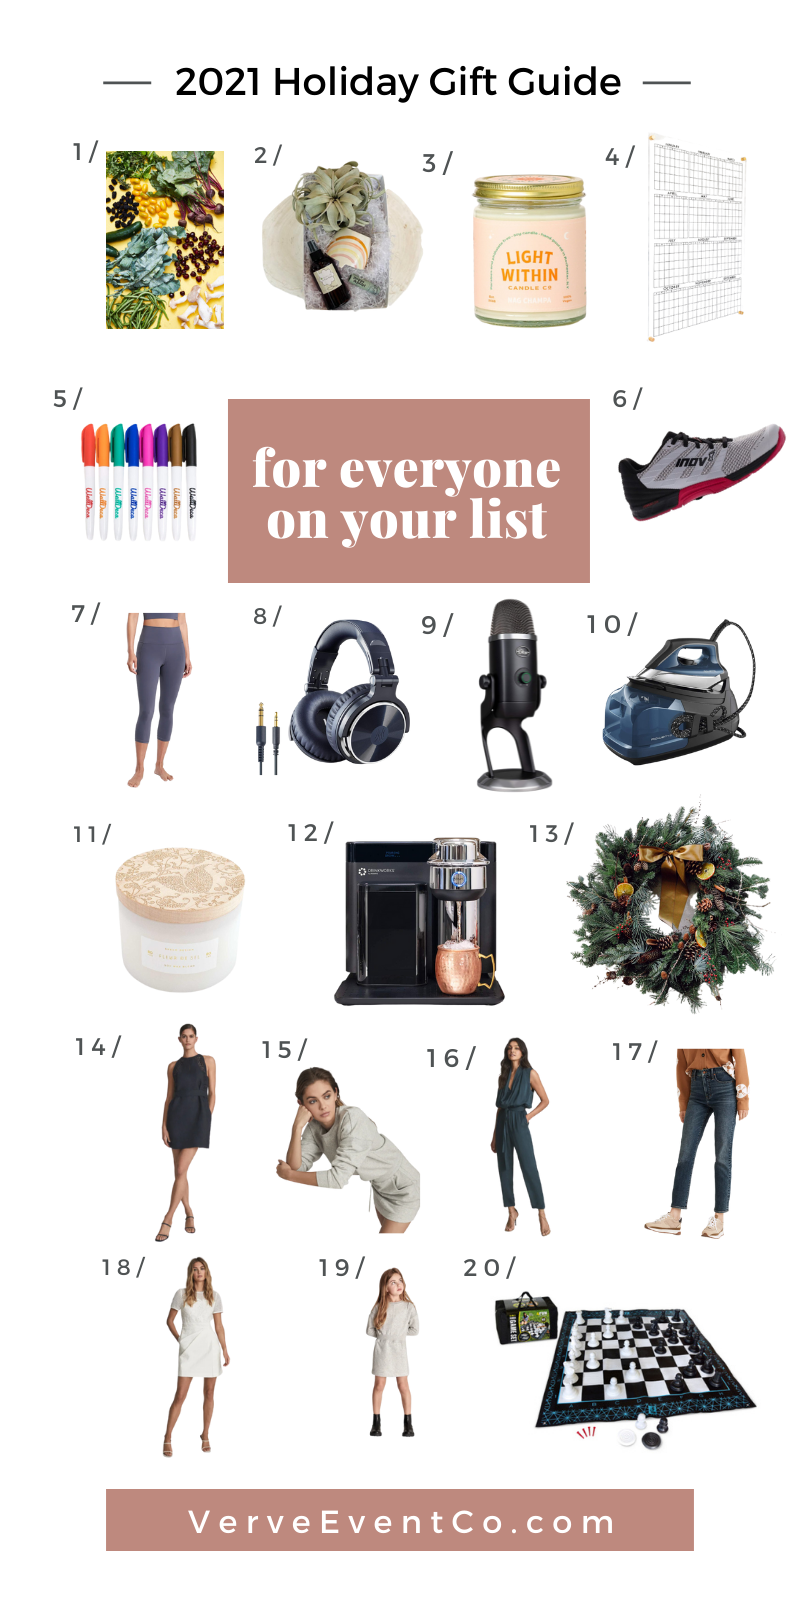 holiday gift guide 2021